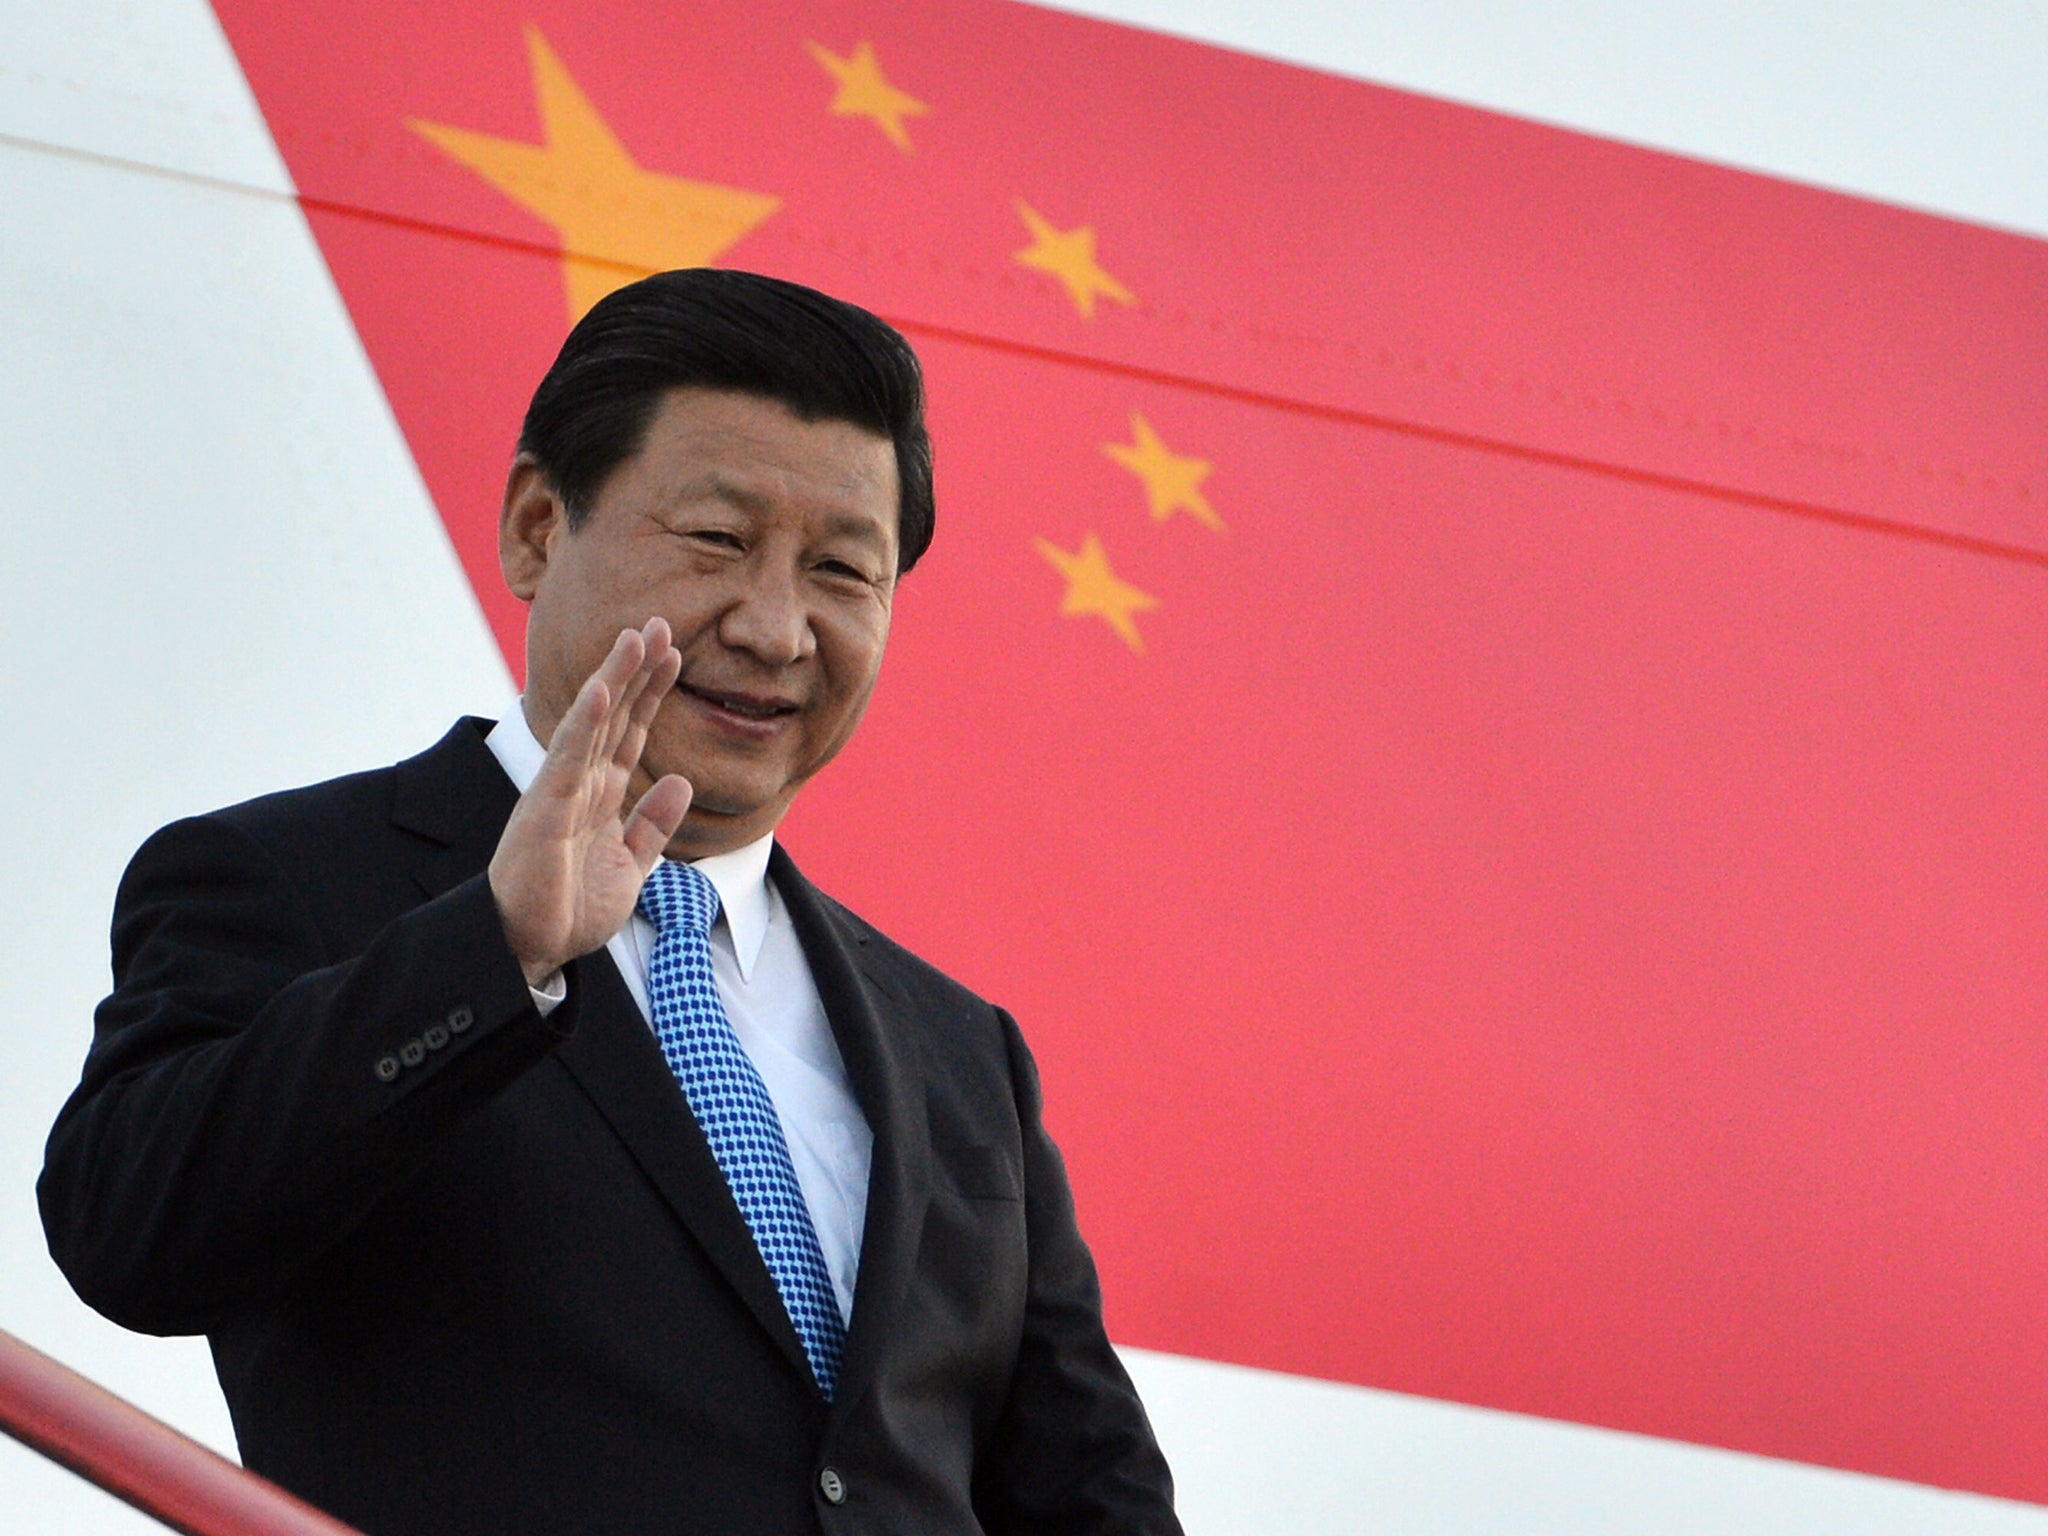 Xi Jinping said officials would 'heed public opinion'